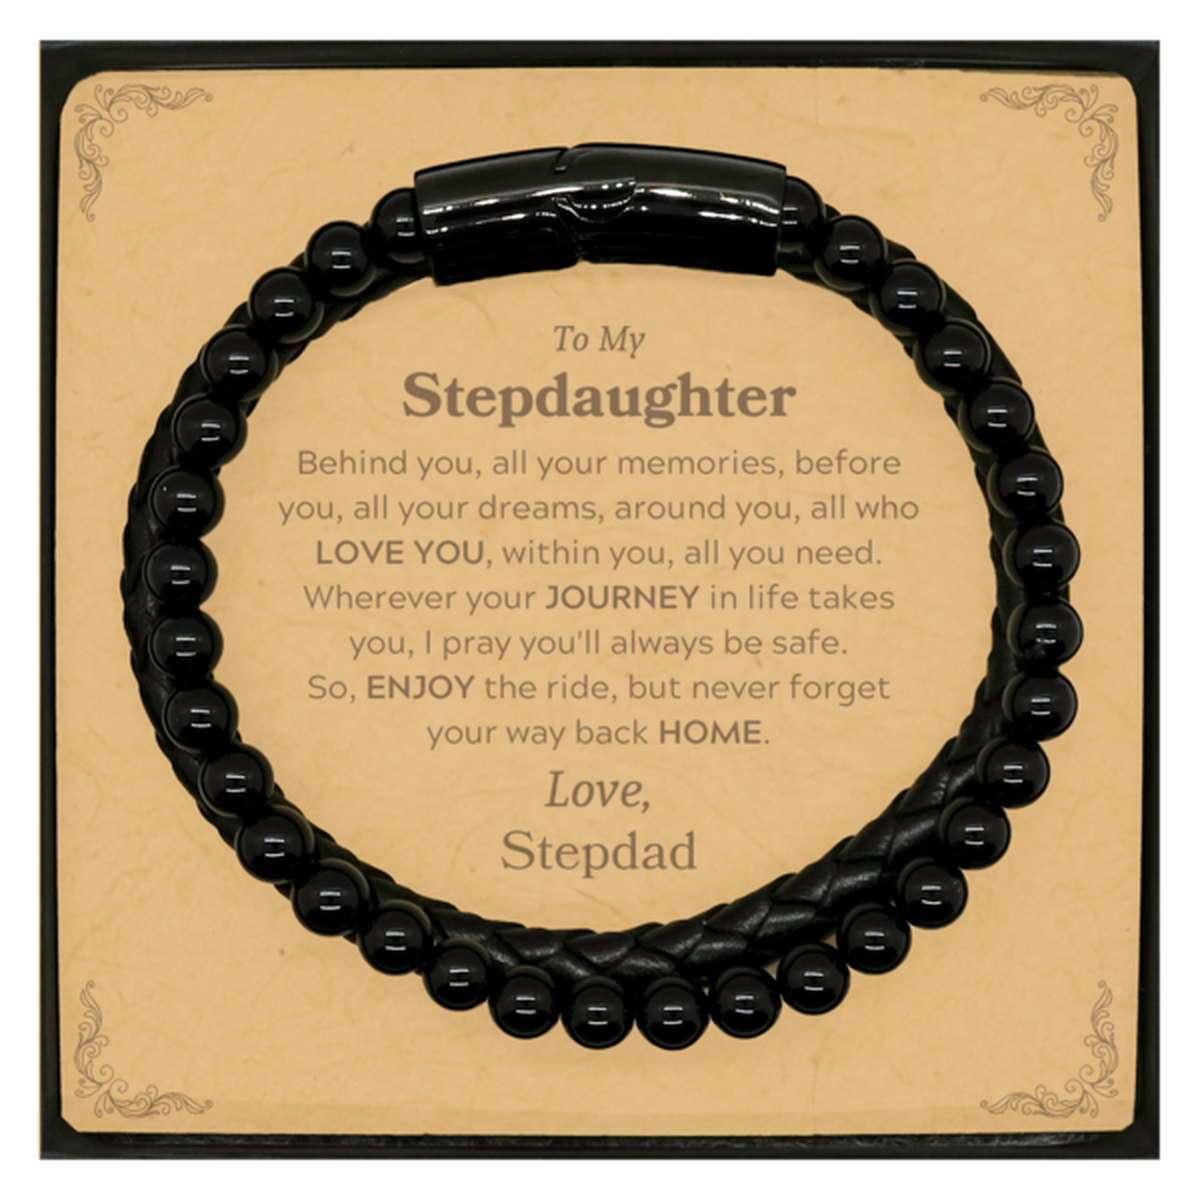 To My Stepdaughter Graduation Gifts from Stepdad, Stepdaughter Stone Leather Bracelets Christmas Birthday Gifts for Stepdaughter Behind you, all your memories, before you, all your dreams. Love, Stepdad